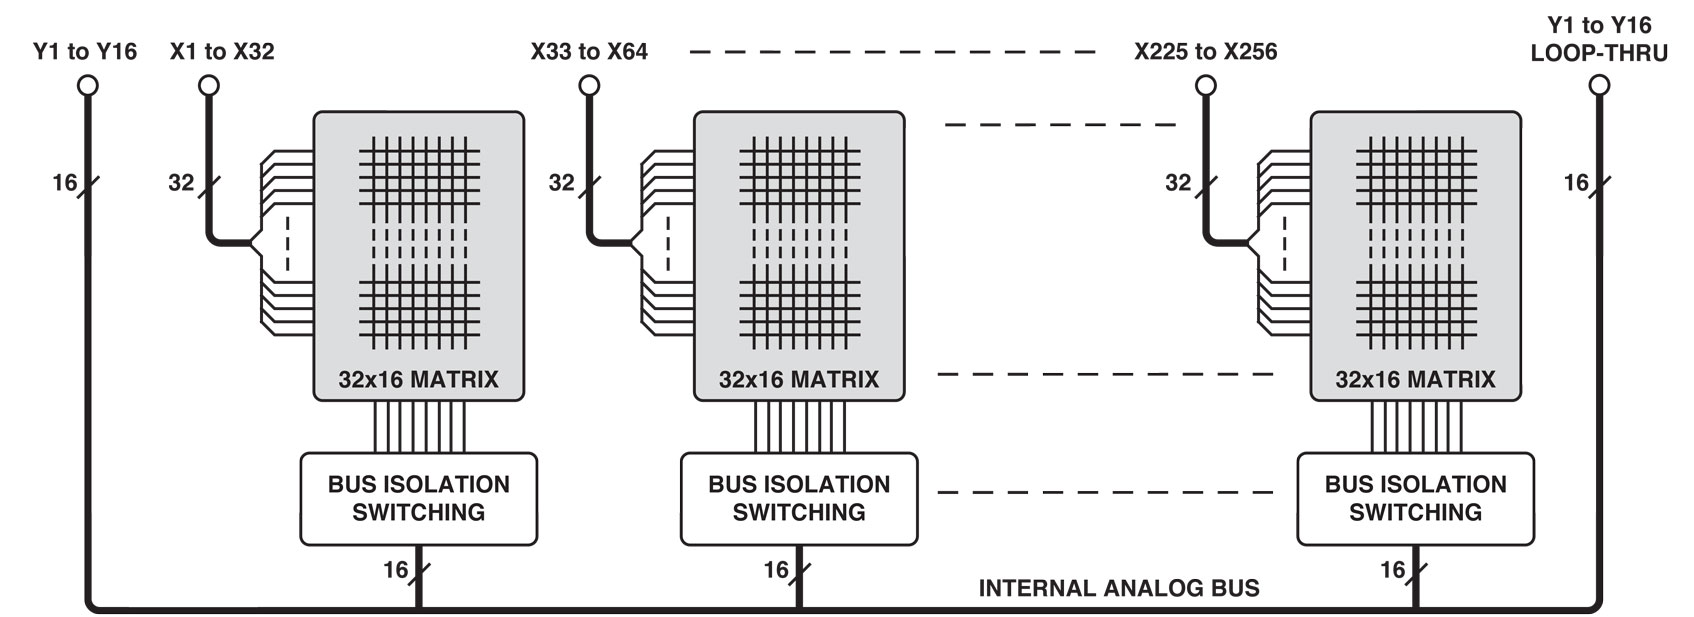 Using isolation relays to exapand a matrix, leaving the interconnection bus in place